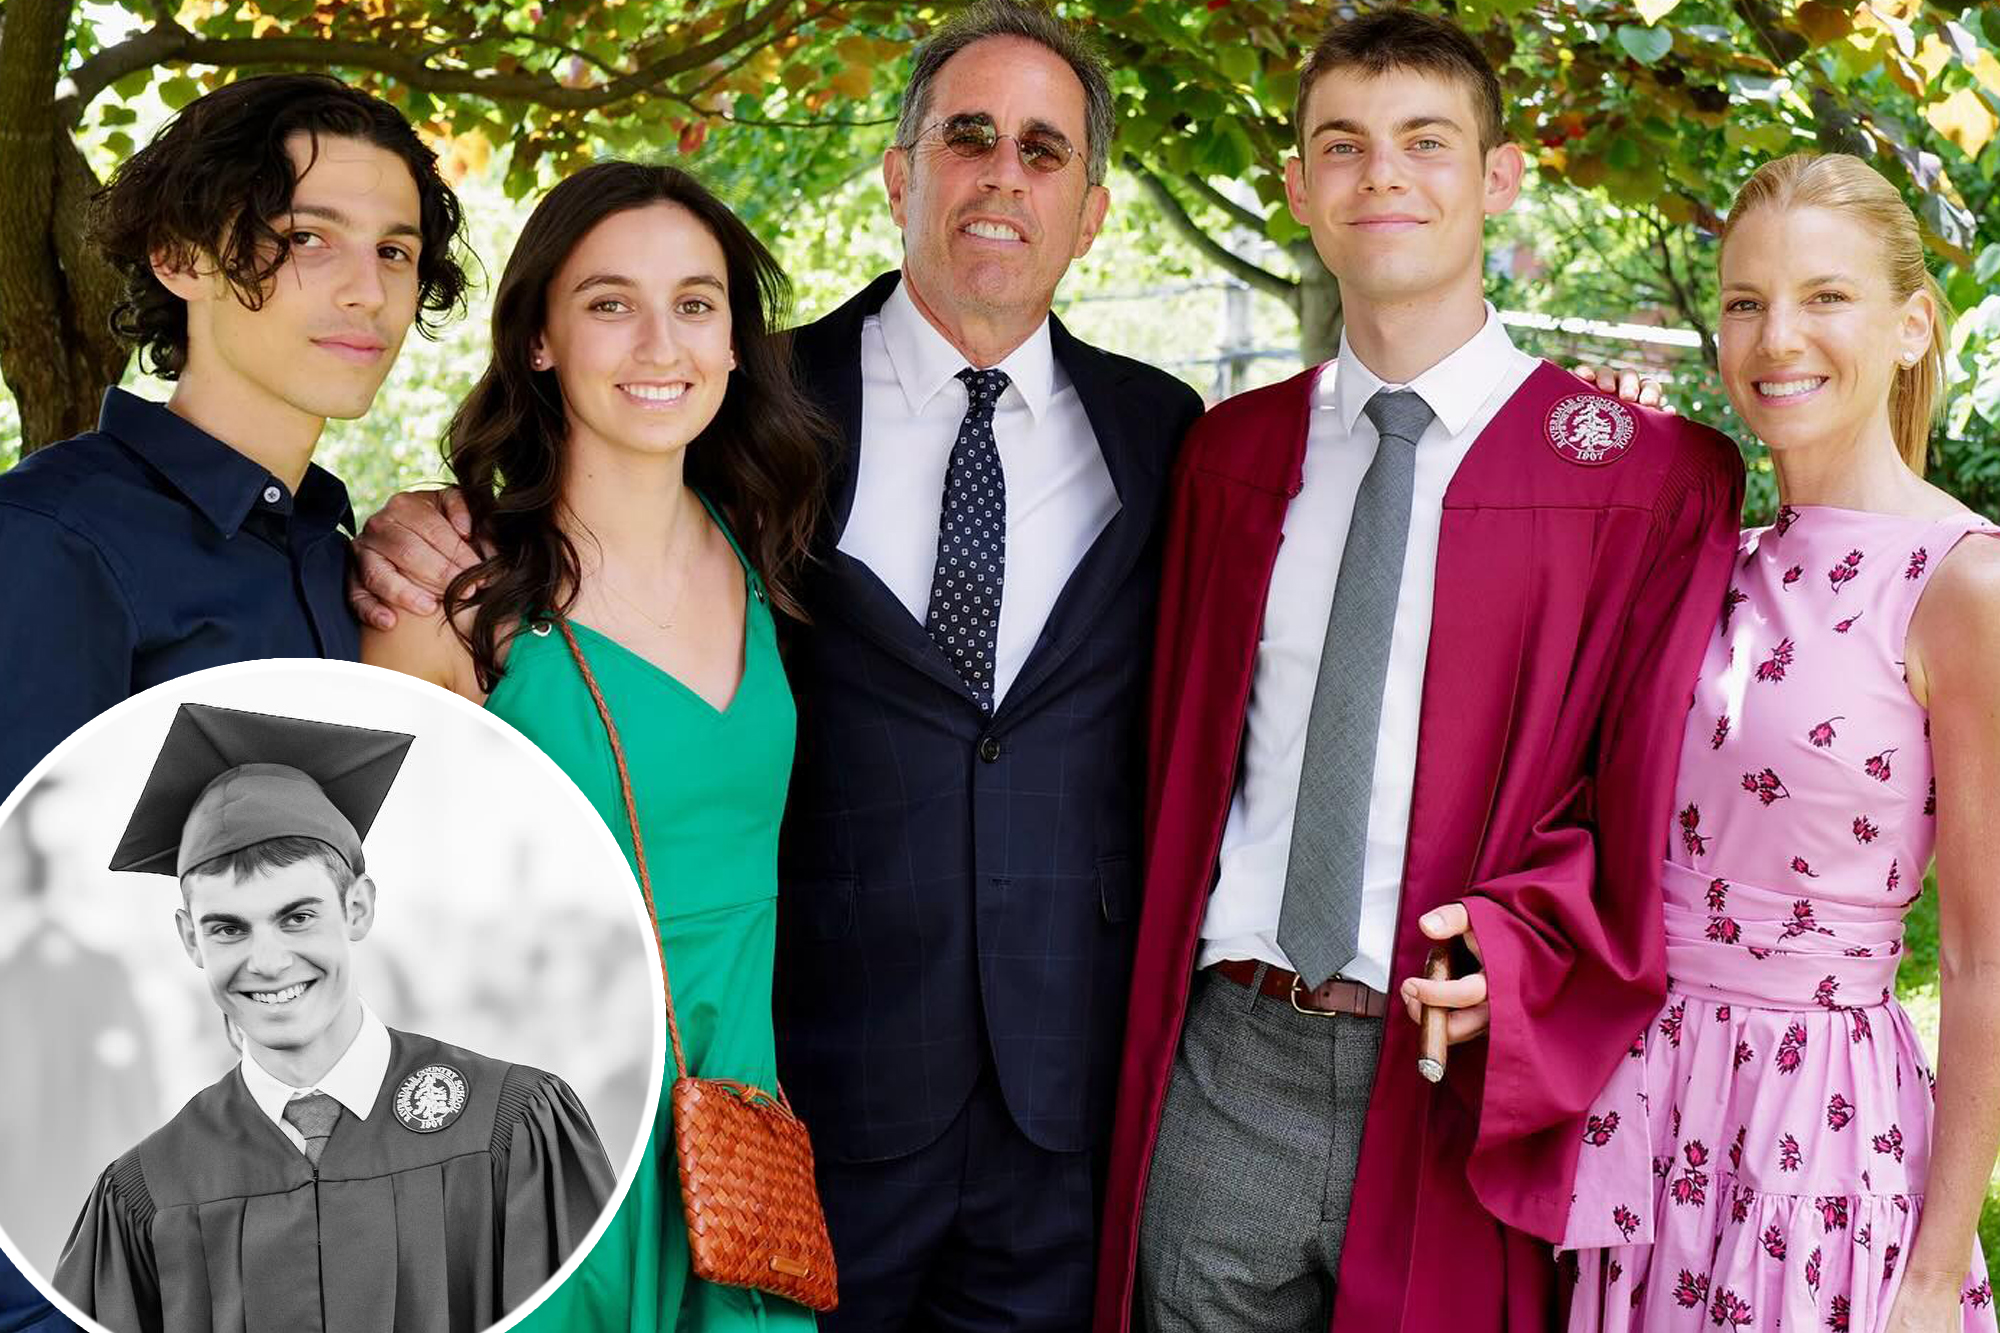 Jerry Seinfeld and wife Jessica pose for family photo at son Shepherd's high school graduation